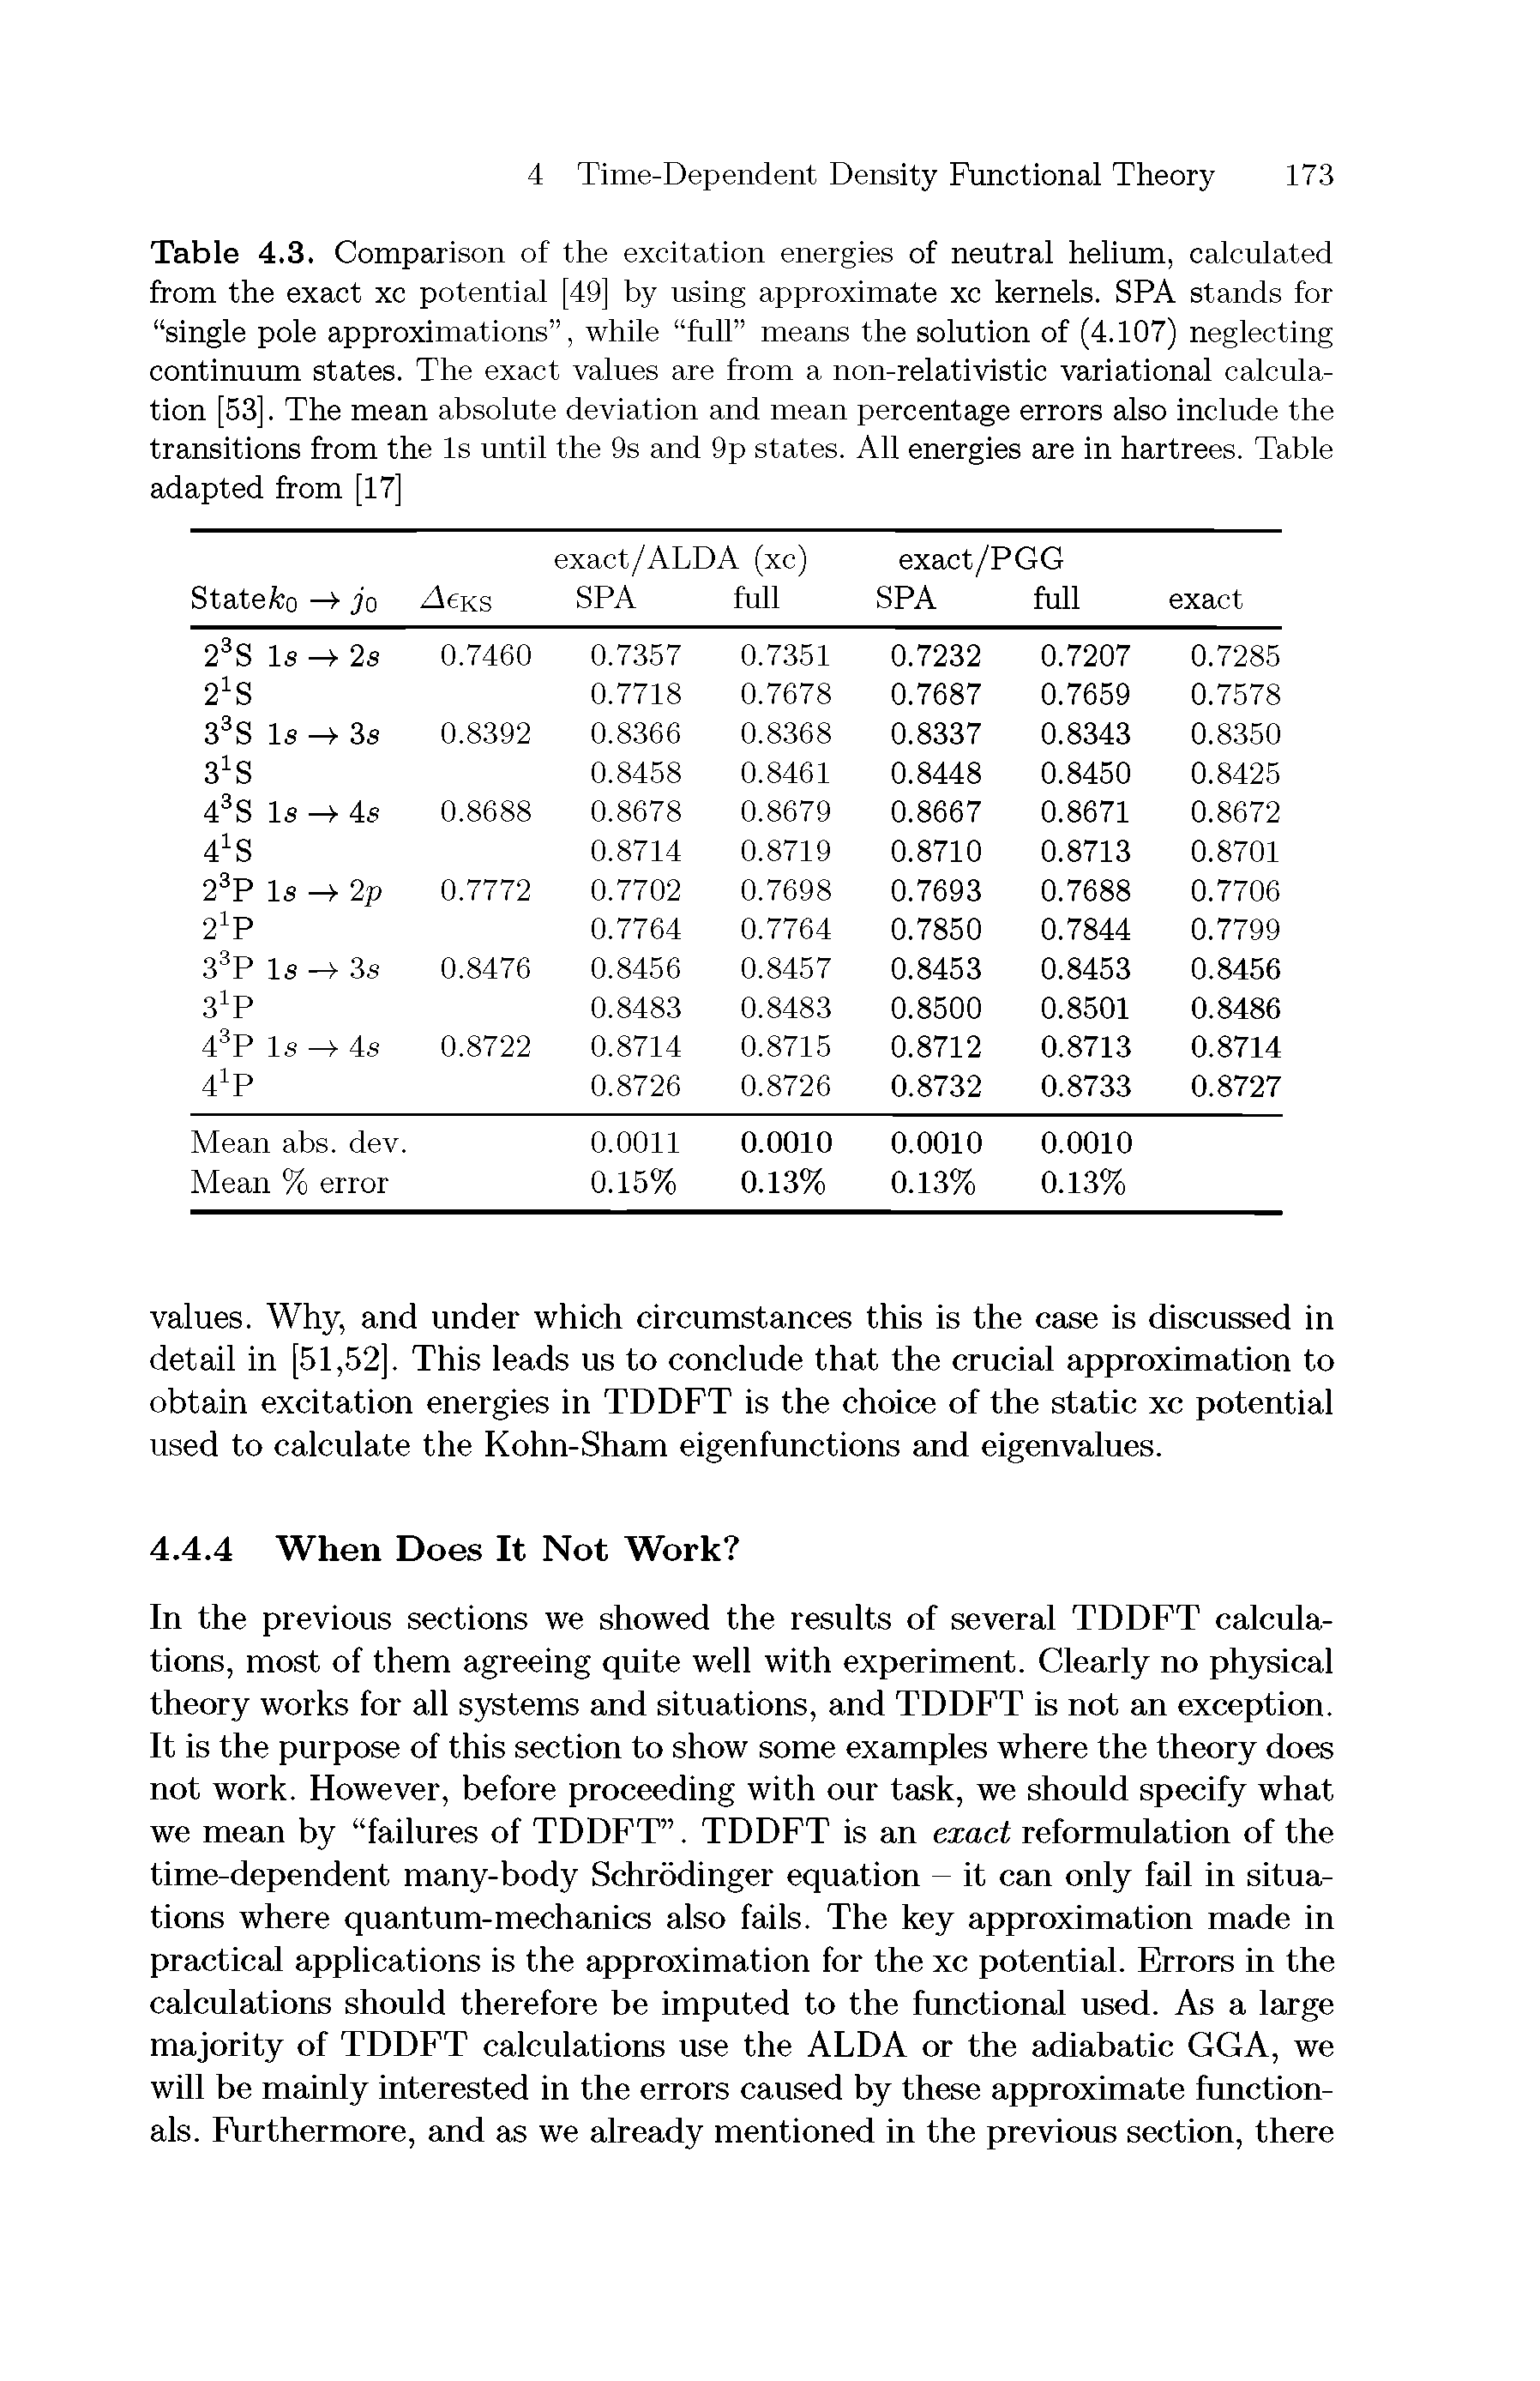 Table 4.3. Comparison of the excitation energies of neutral helimn, calculated from the exact xc potential [49] by using approximate xc kernels. SPA stands for single pole approximations , while fuU means the solution of (4.107) neglecting continuum states. The exact values are from a non-relativistic variational calculation [53]. The mean absolute deviation and mean percentage errors also include the transitions from the Is until the 9s and 9p states. All energies are in hartrees. Table adapted from [17]...